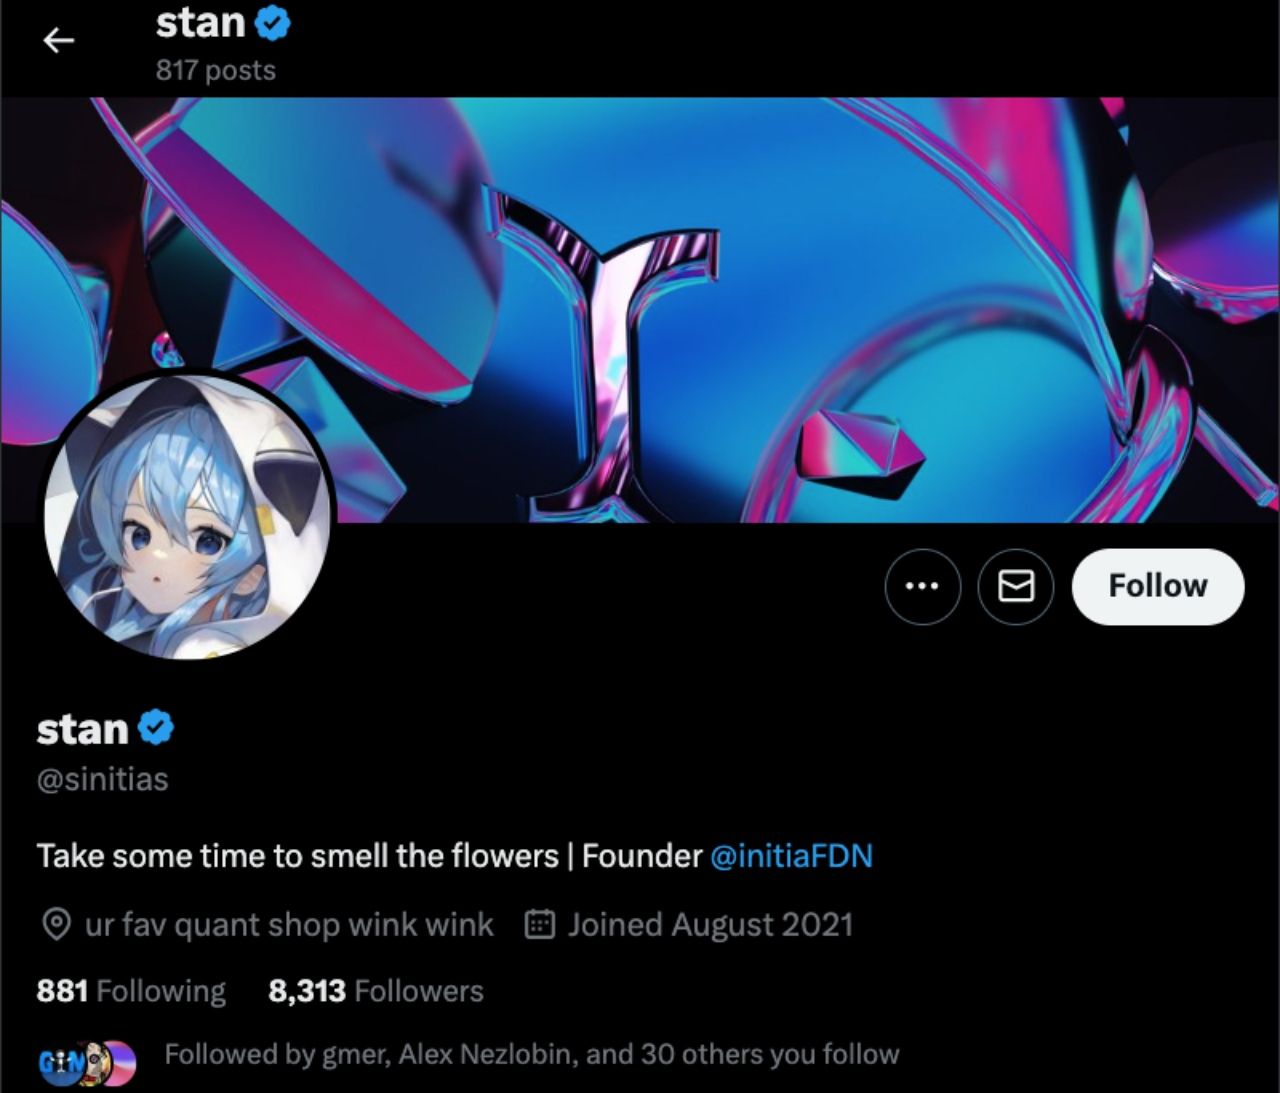 Stan (Founder)